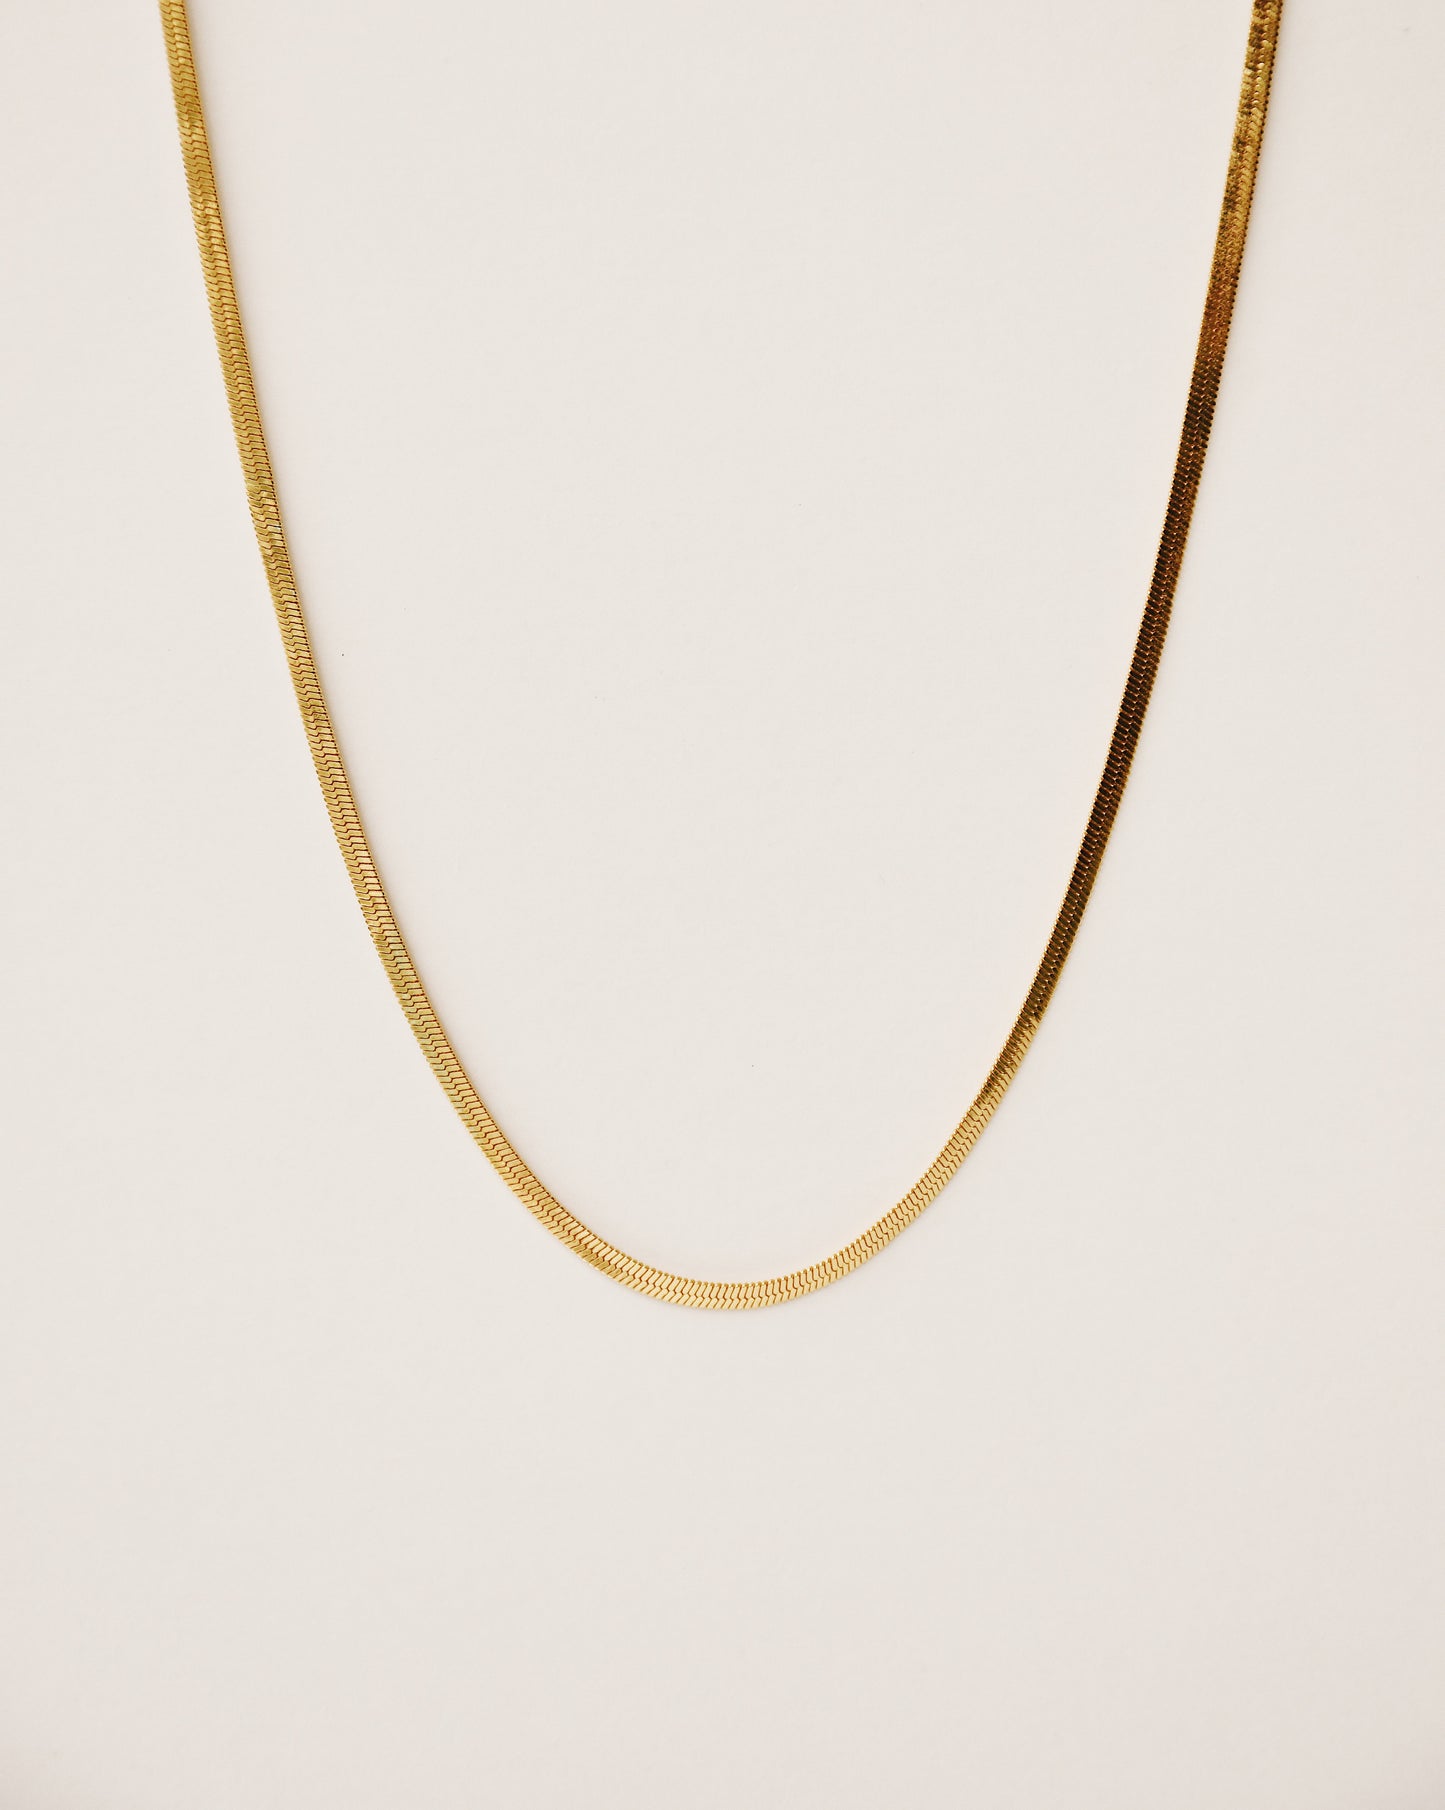 herringbone chain handcrafted from 925 sterling silver plated in 18k gold. 2020 slow fashion trend.